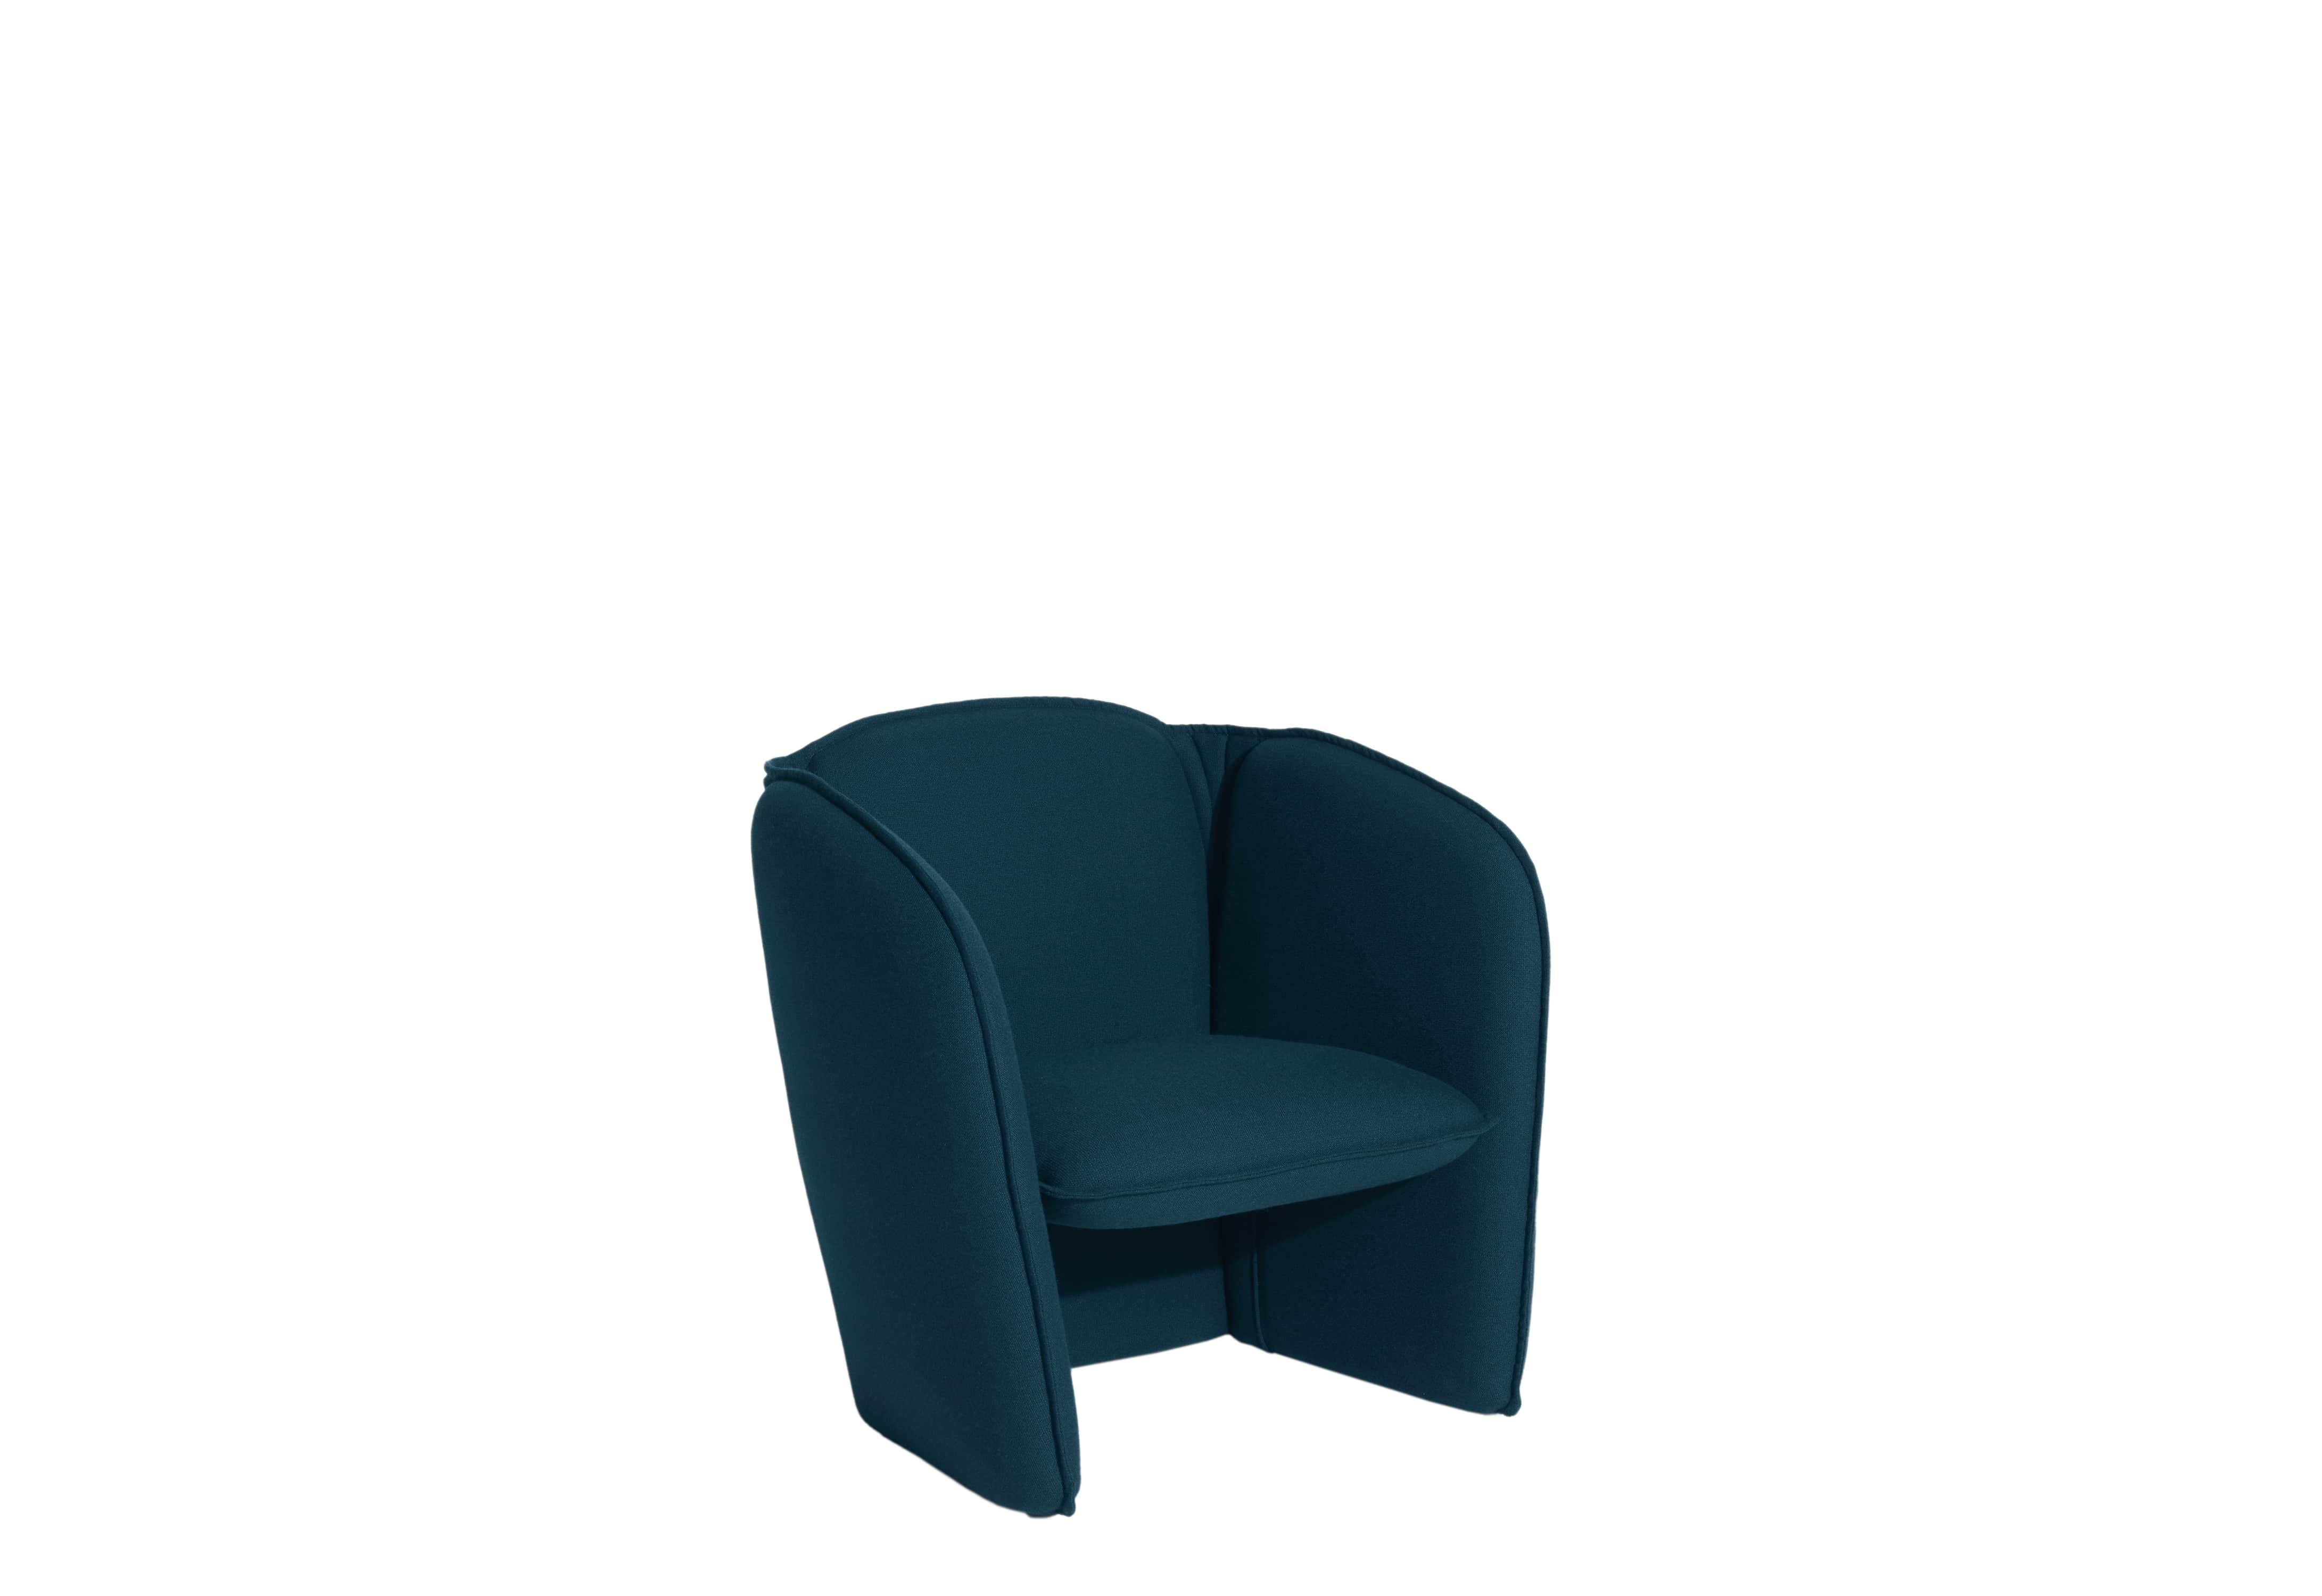 Petite Friture Lily Armchair in Navy Blue by Färg & Blanche, 2022

A comprehensive collection comprising a sofa and armchair. With impeccable, concise proportions, and smooth and organic contours for a hospitable feel.

Established in Stockholm